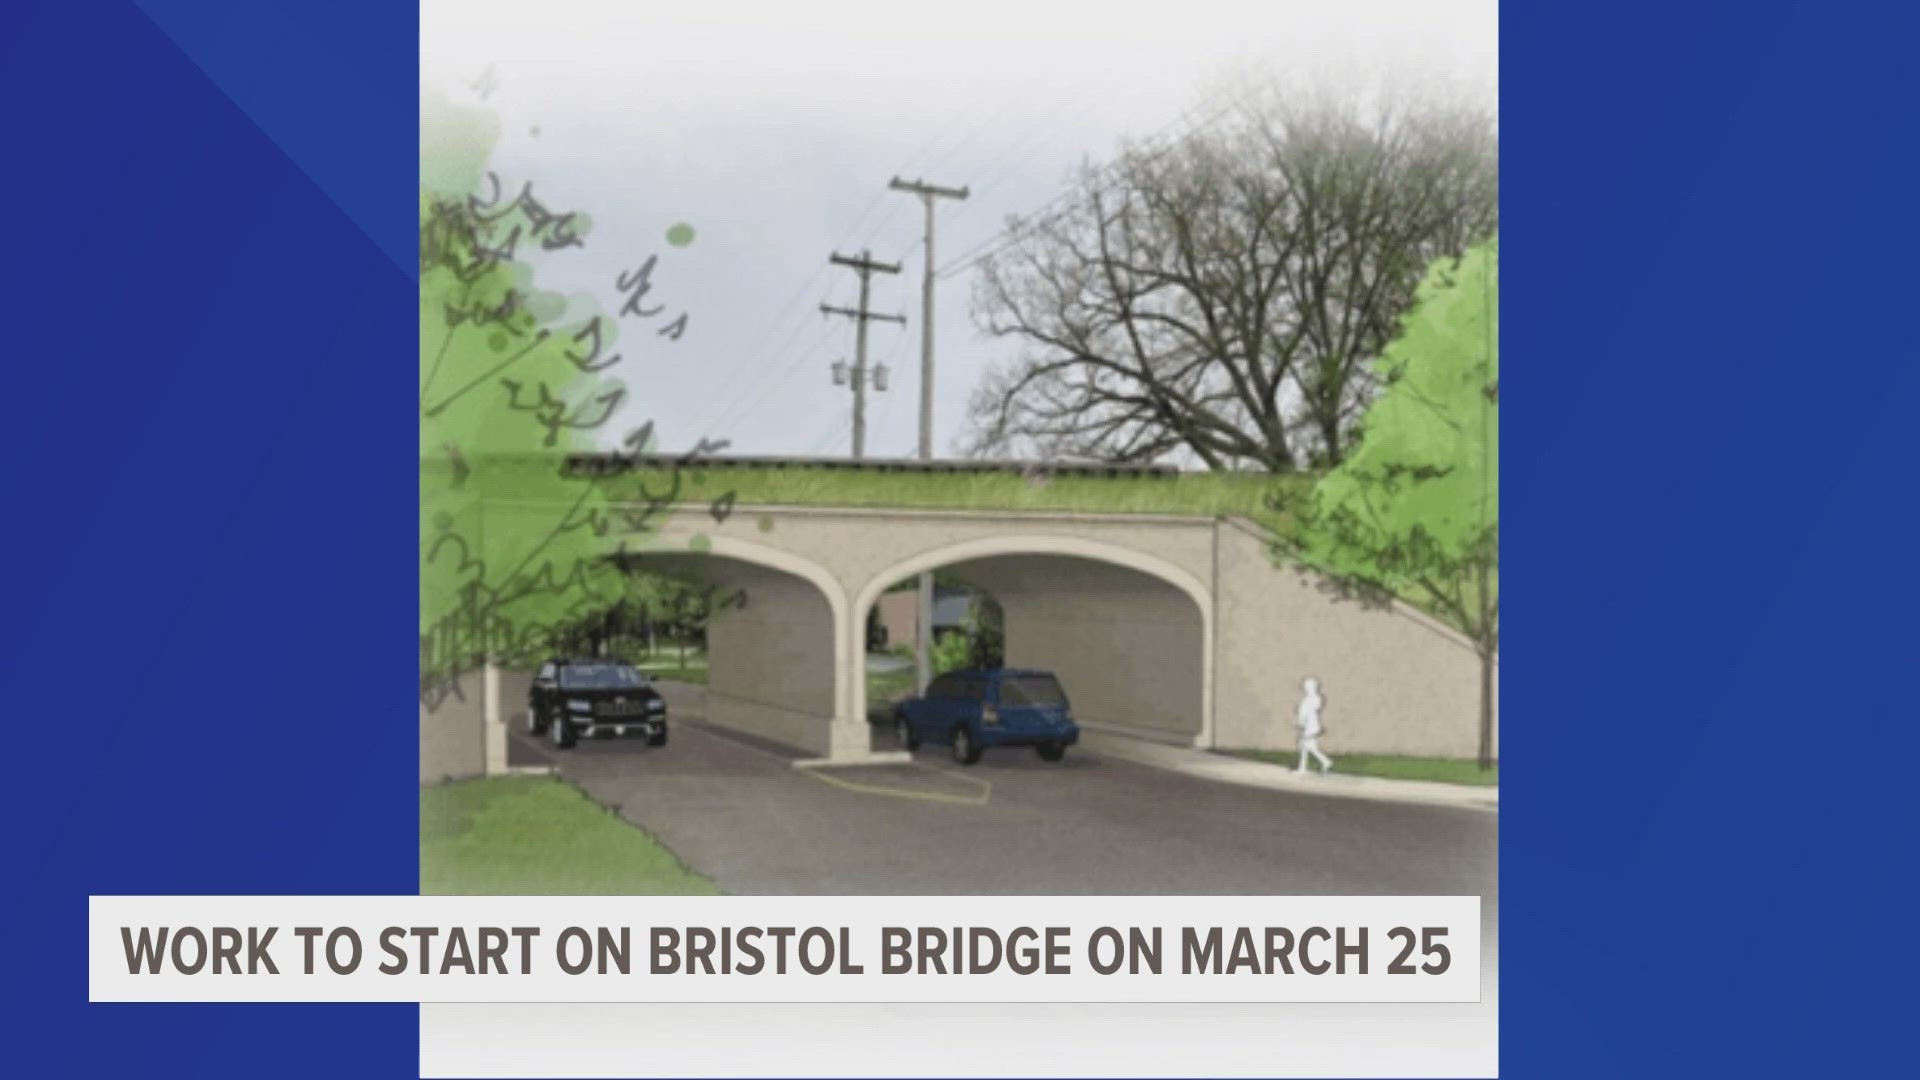 The current single-span bridge will be replaced with a two-span arched bridge.